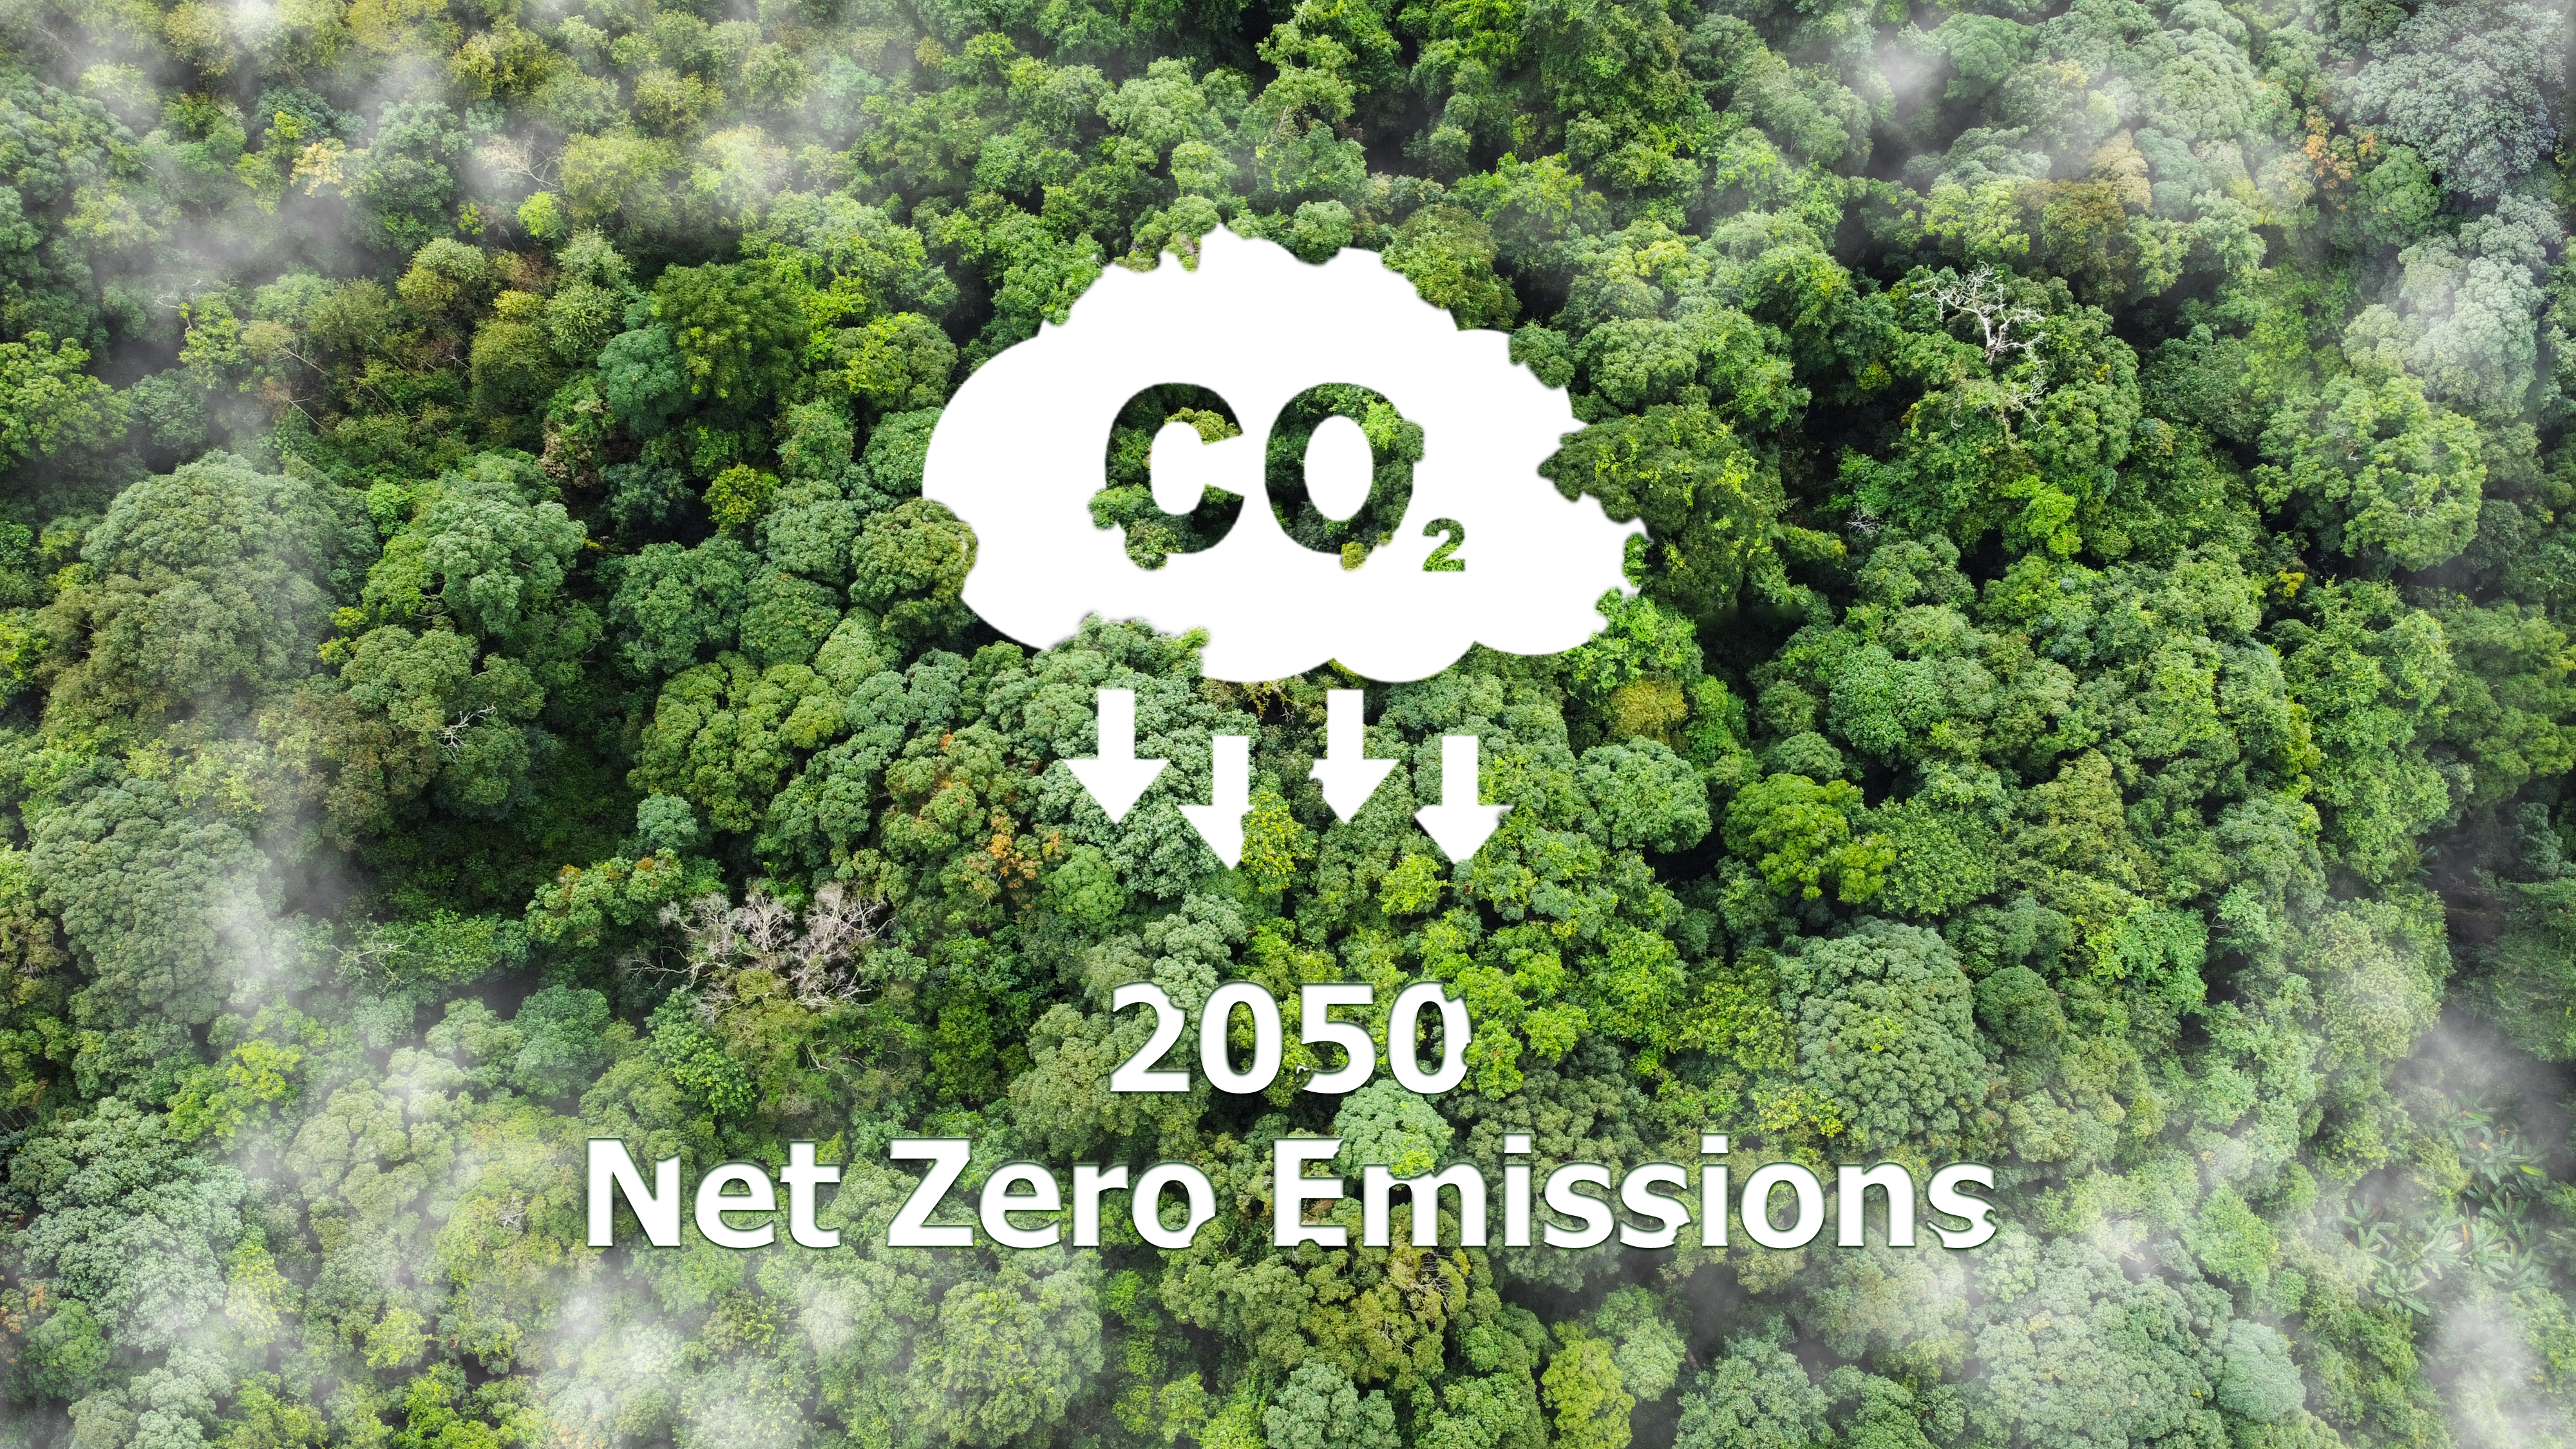 Net Zero 2050 Carbon Neutral and Net Zero Concept natural environment A climate neutral long term strategy greenhouse gas emissions targets A cloud of mist in the green Net Zero figure.